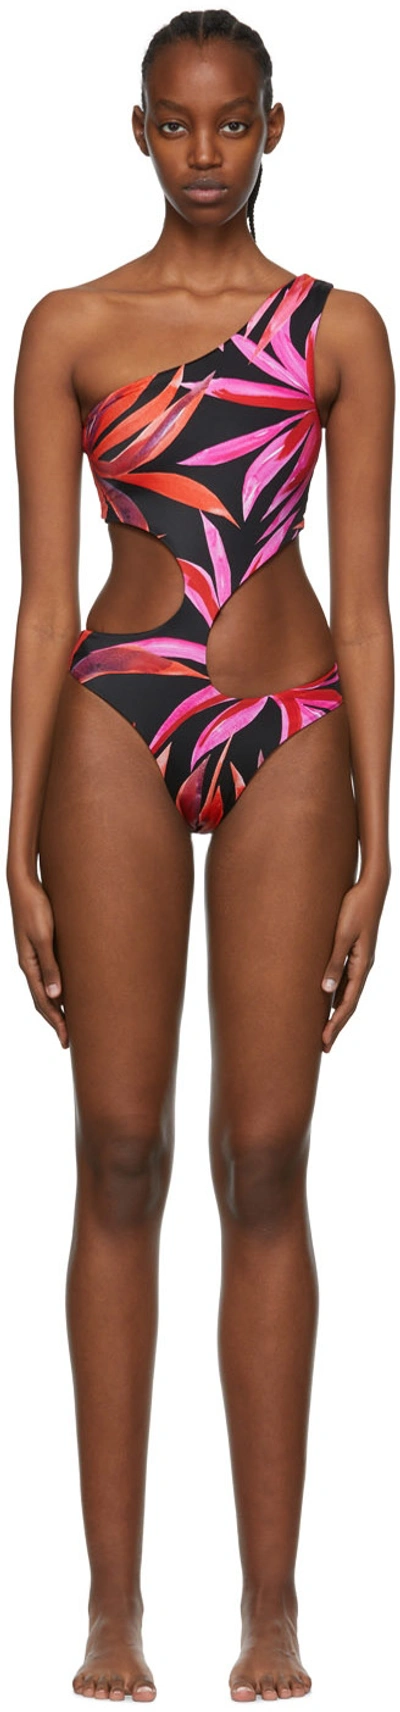 Louisa Ballou Black Recycled Nylonone-piece Swimsuit In Lunar Bloom Pink